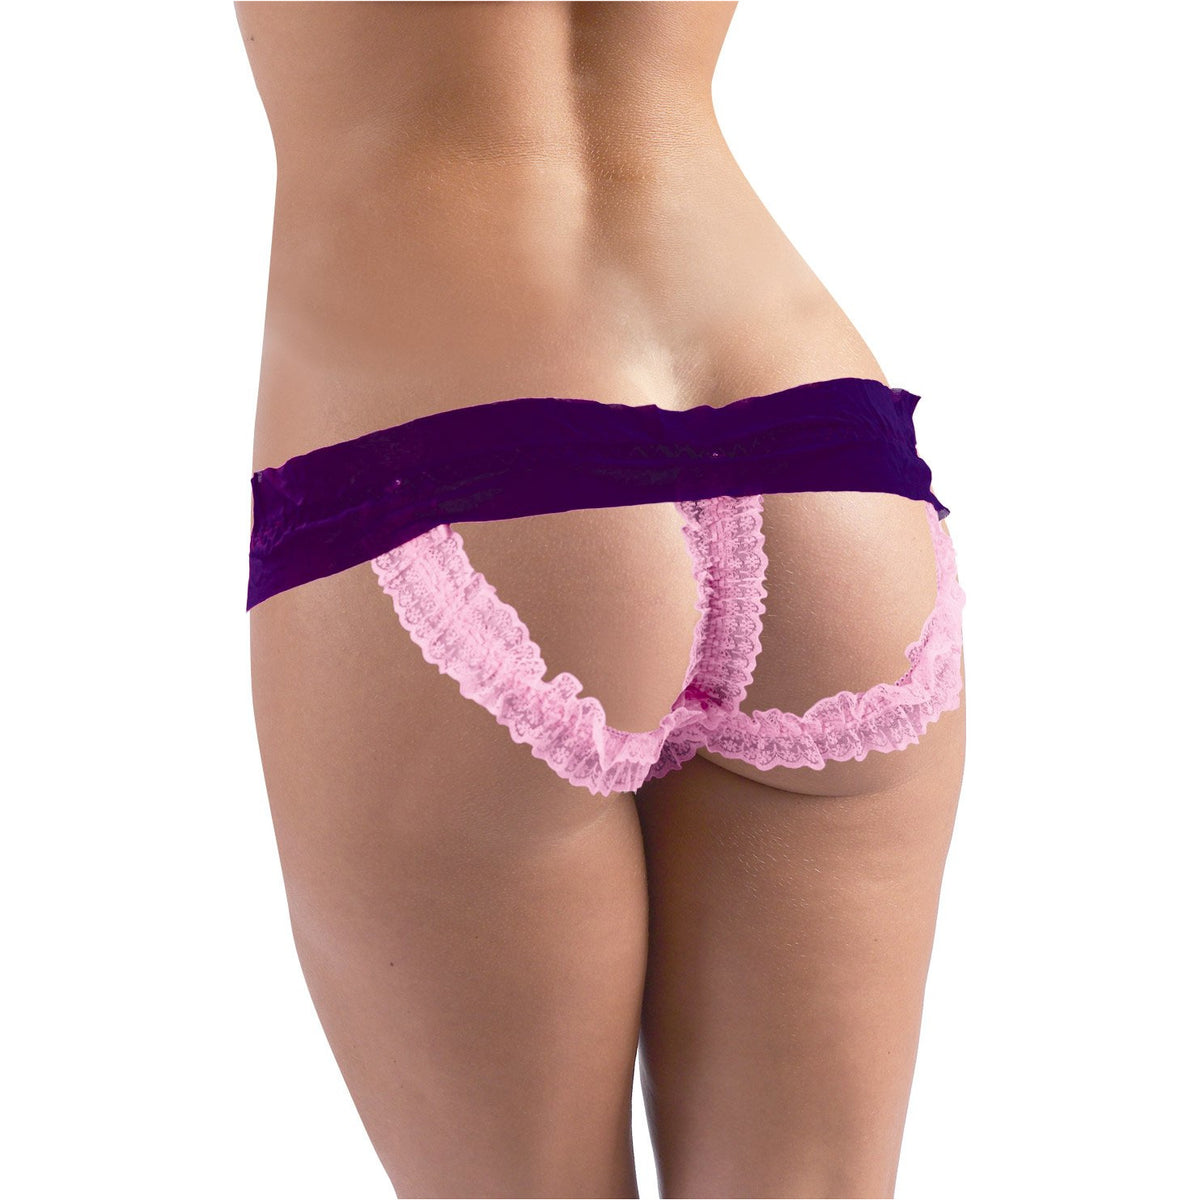 Cherry Wear Open Bum Sheer Thong, Lace Trim &amp; Bow - Purple and Pink